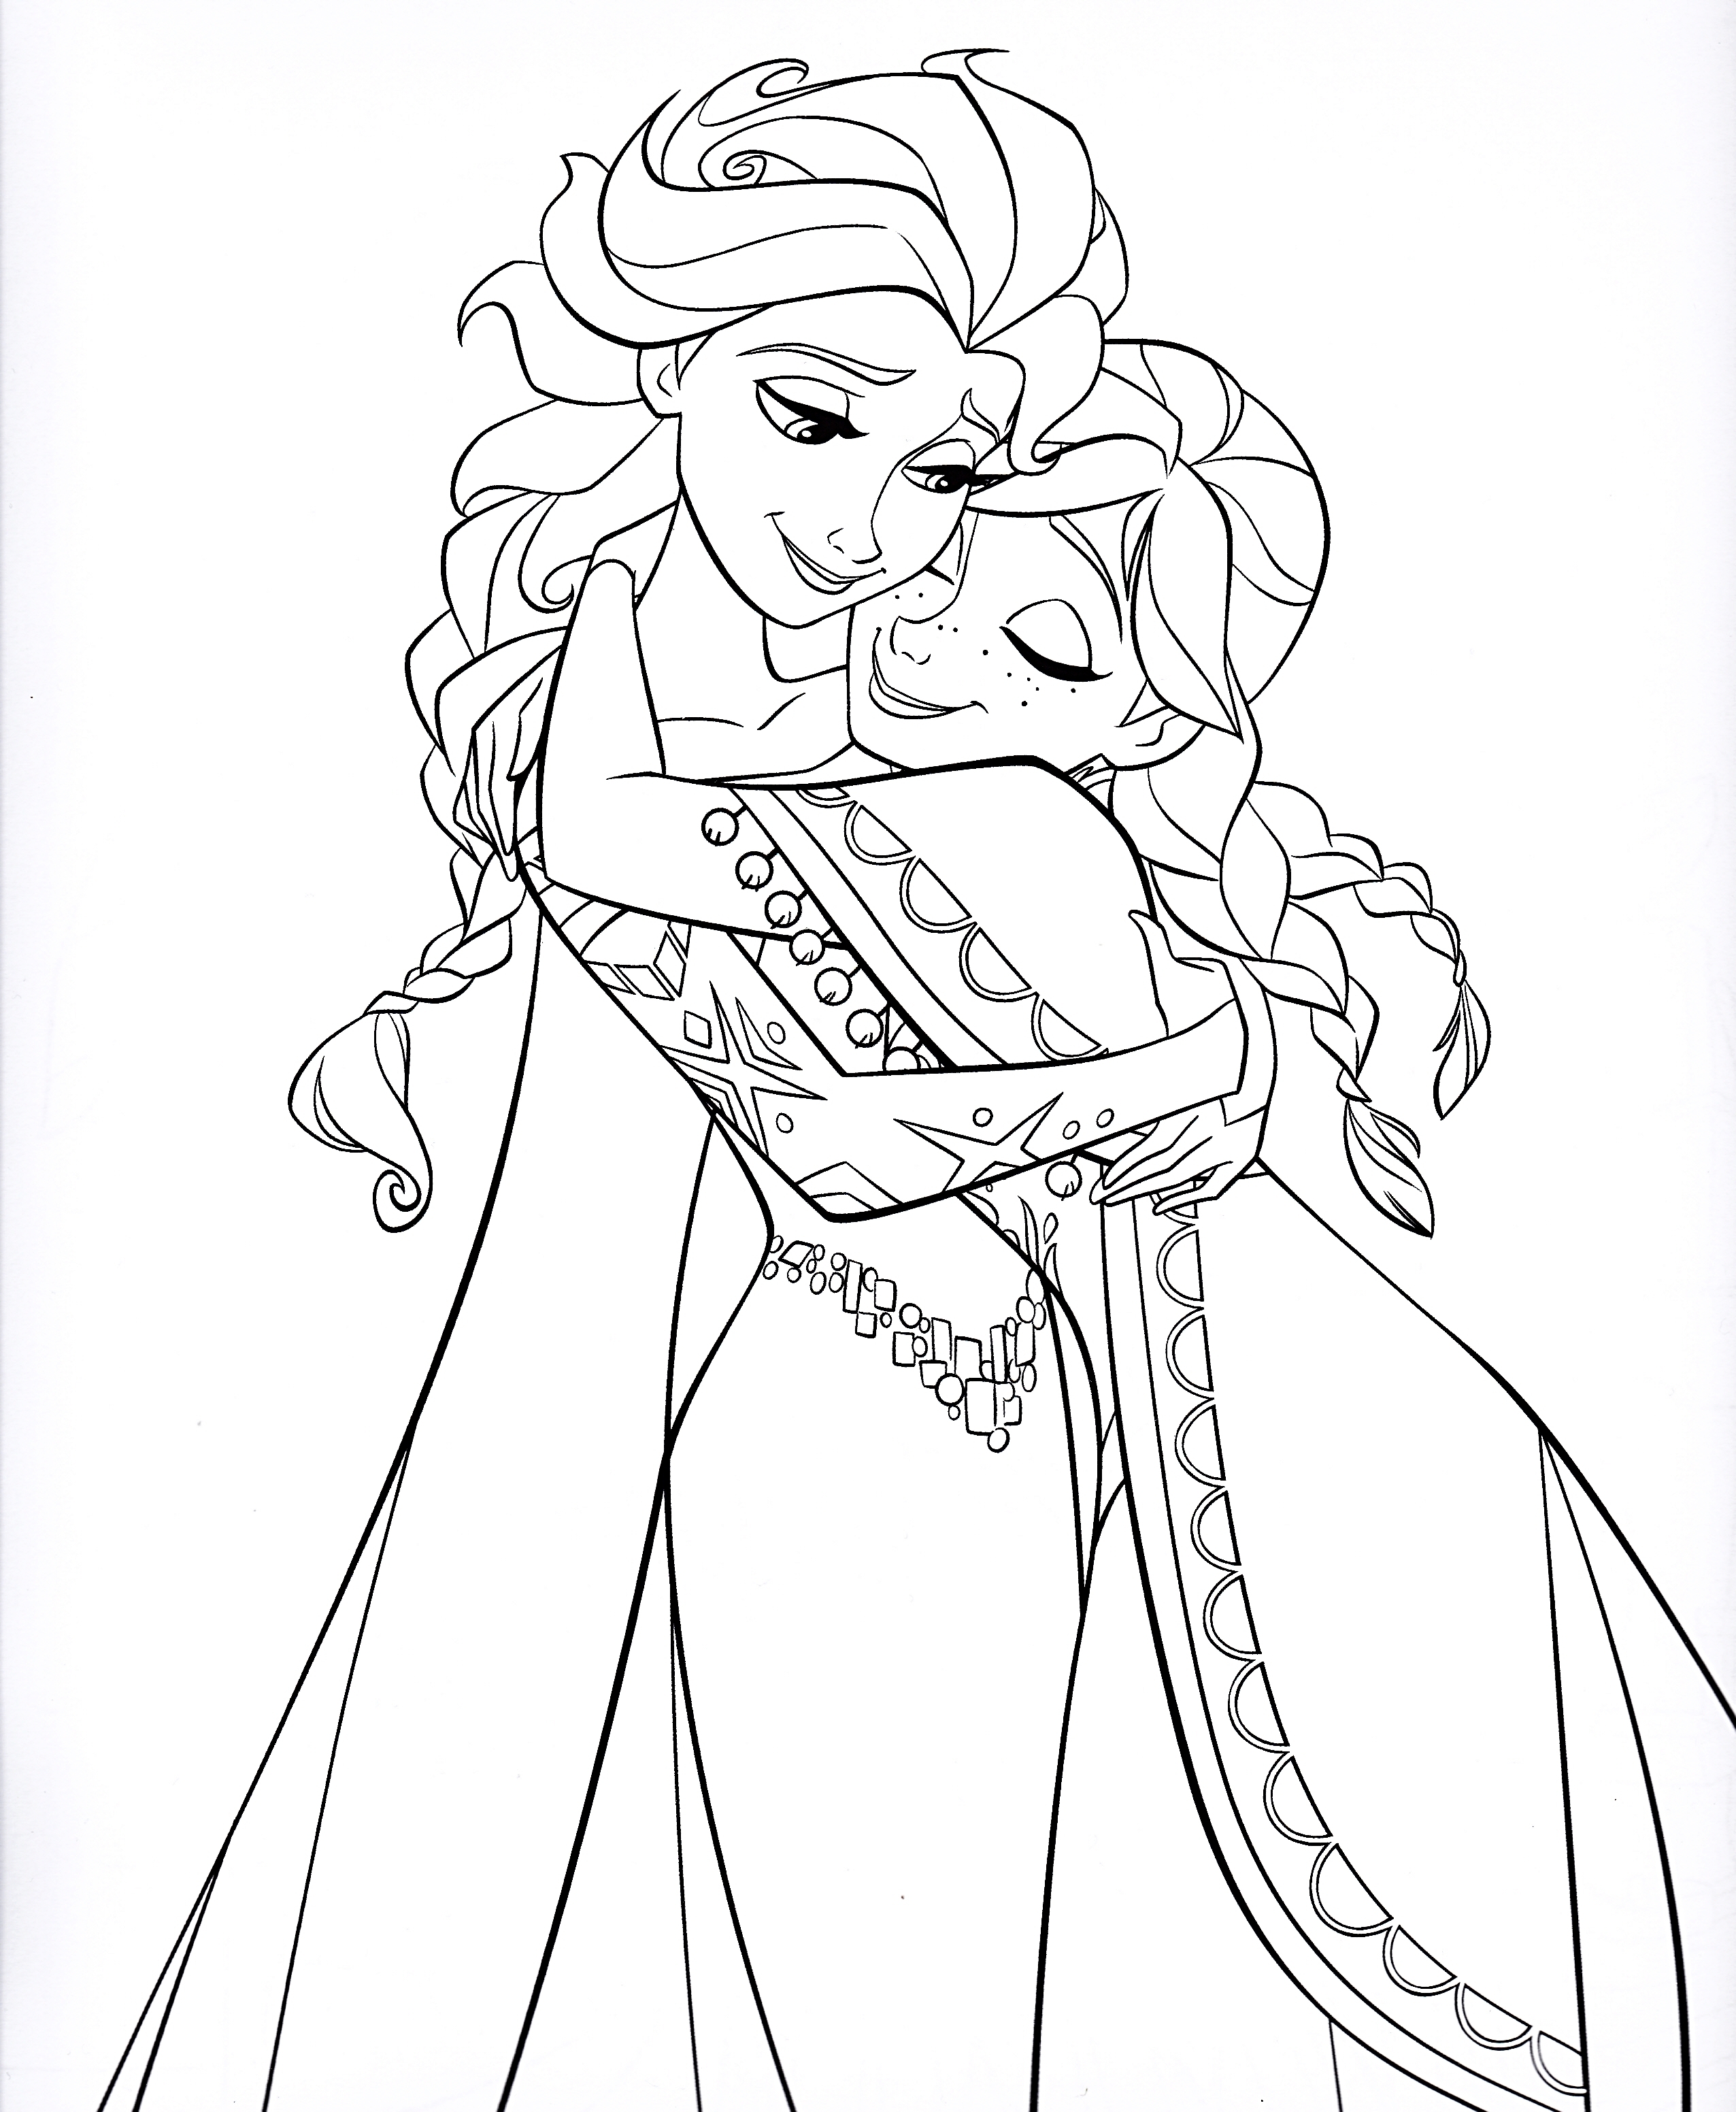 Disney Princess Coloring Pages For Kids at GetDrawings | Free download